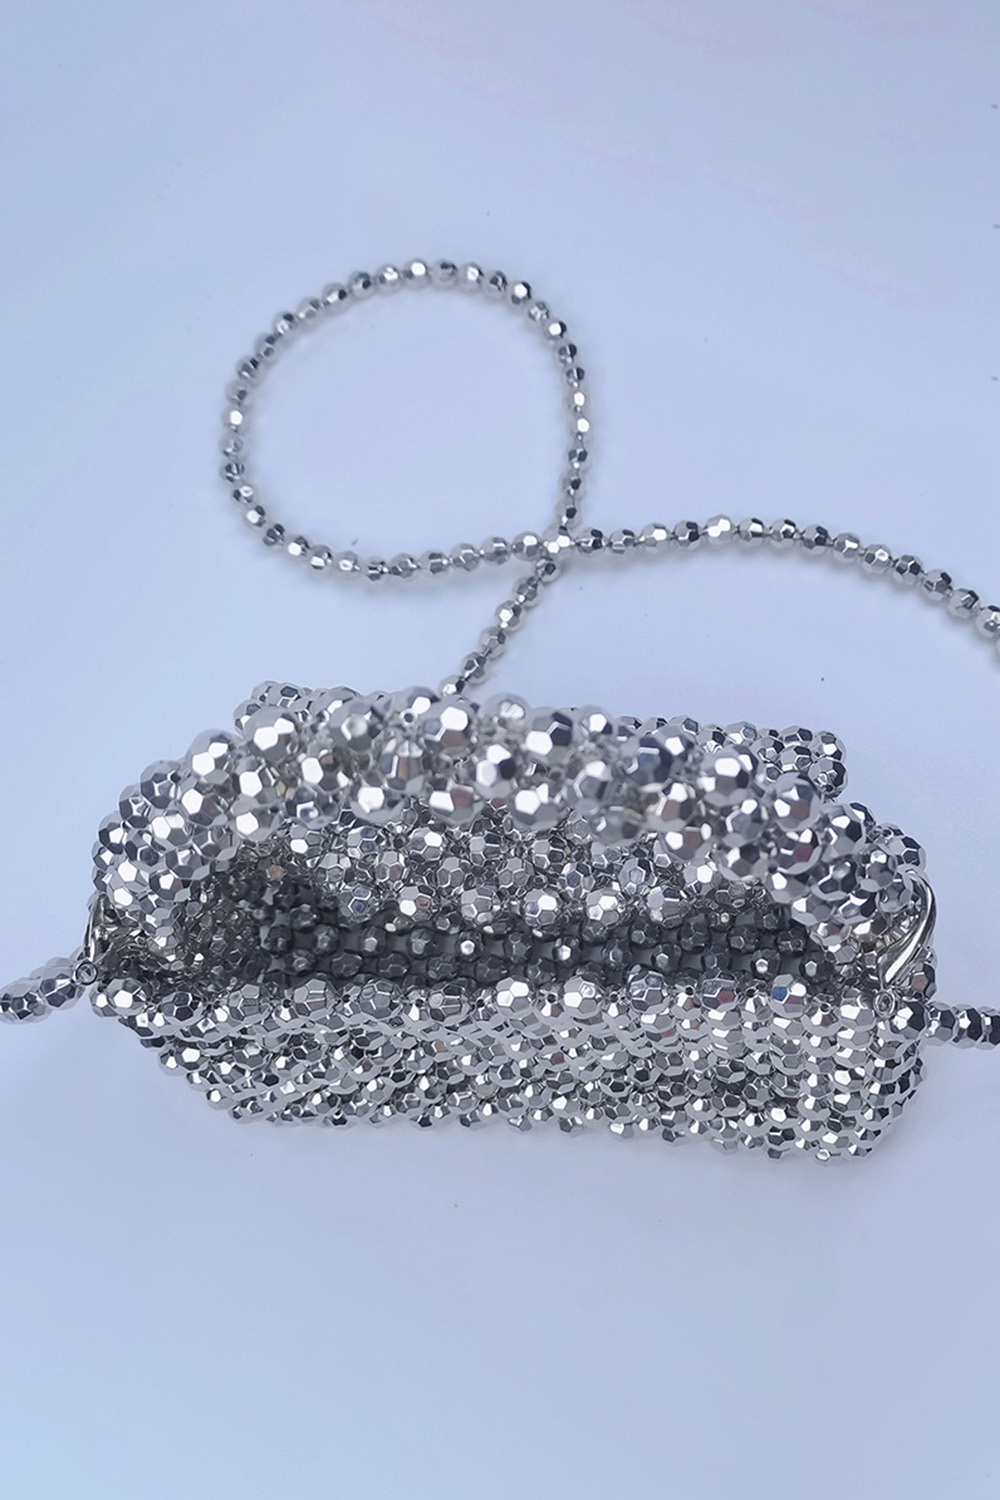 Party Silver Metallic Beaded Square Shoulder Bag